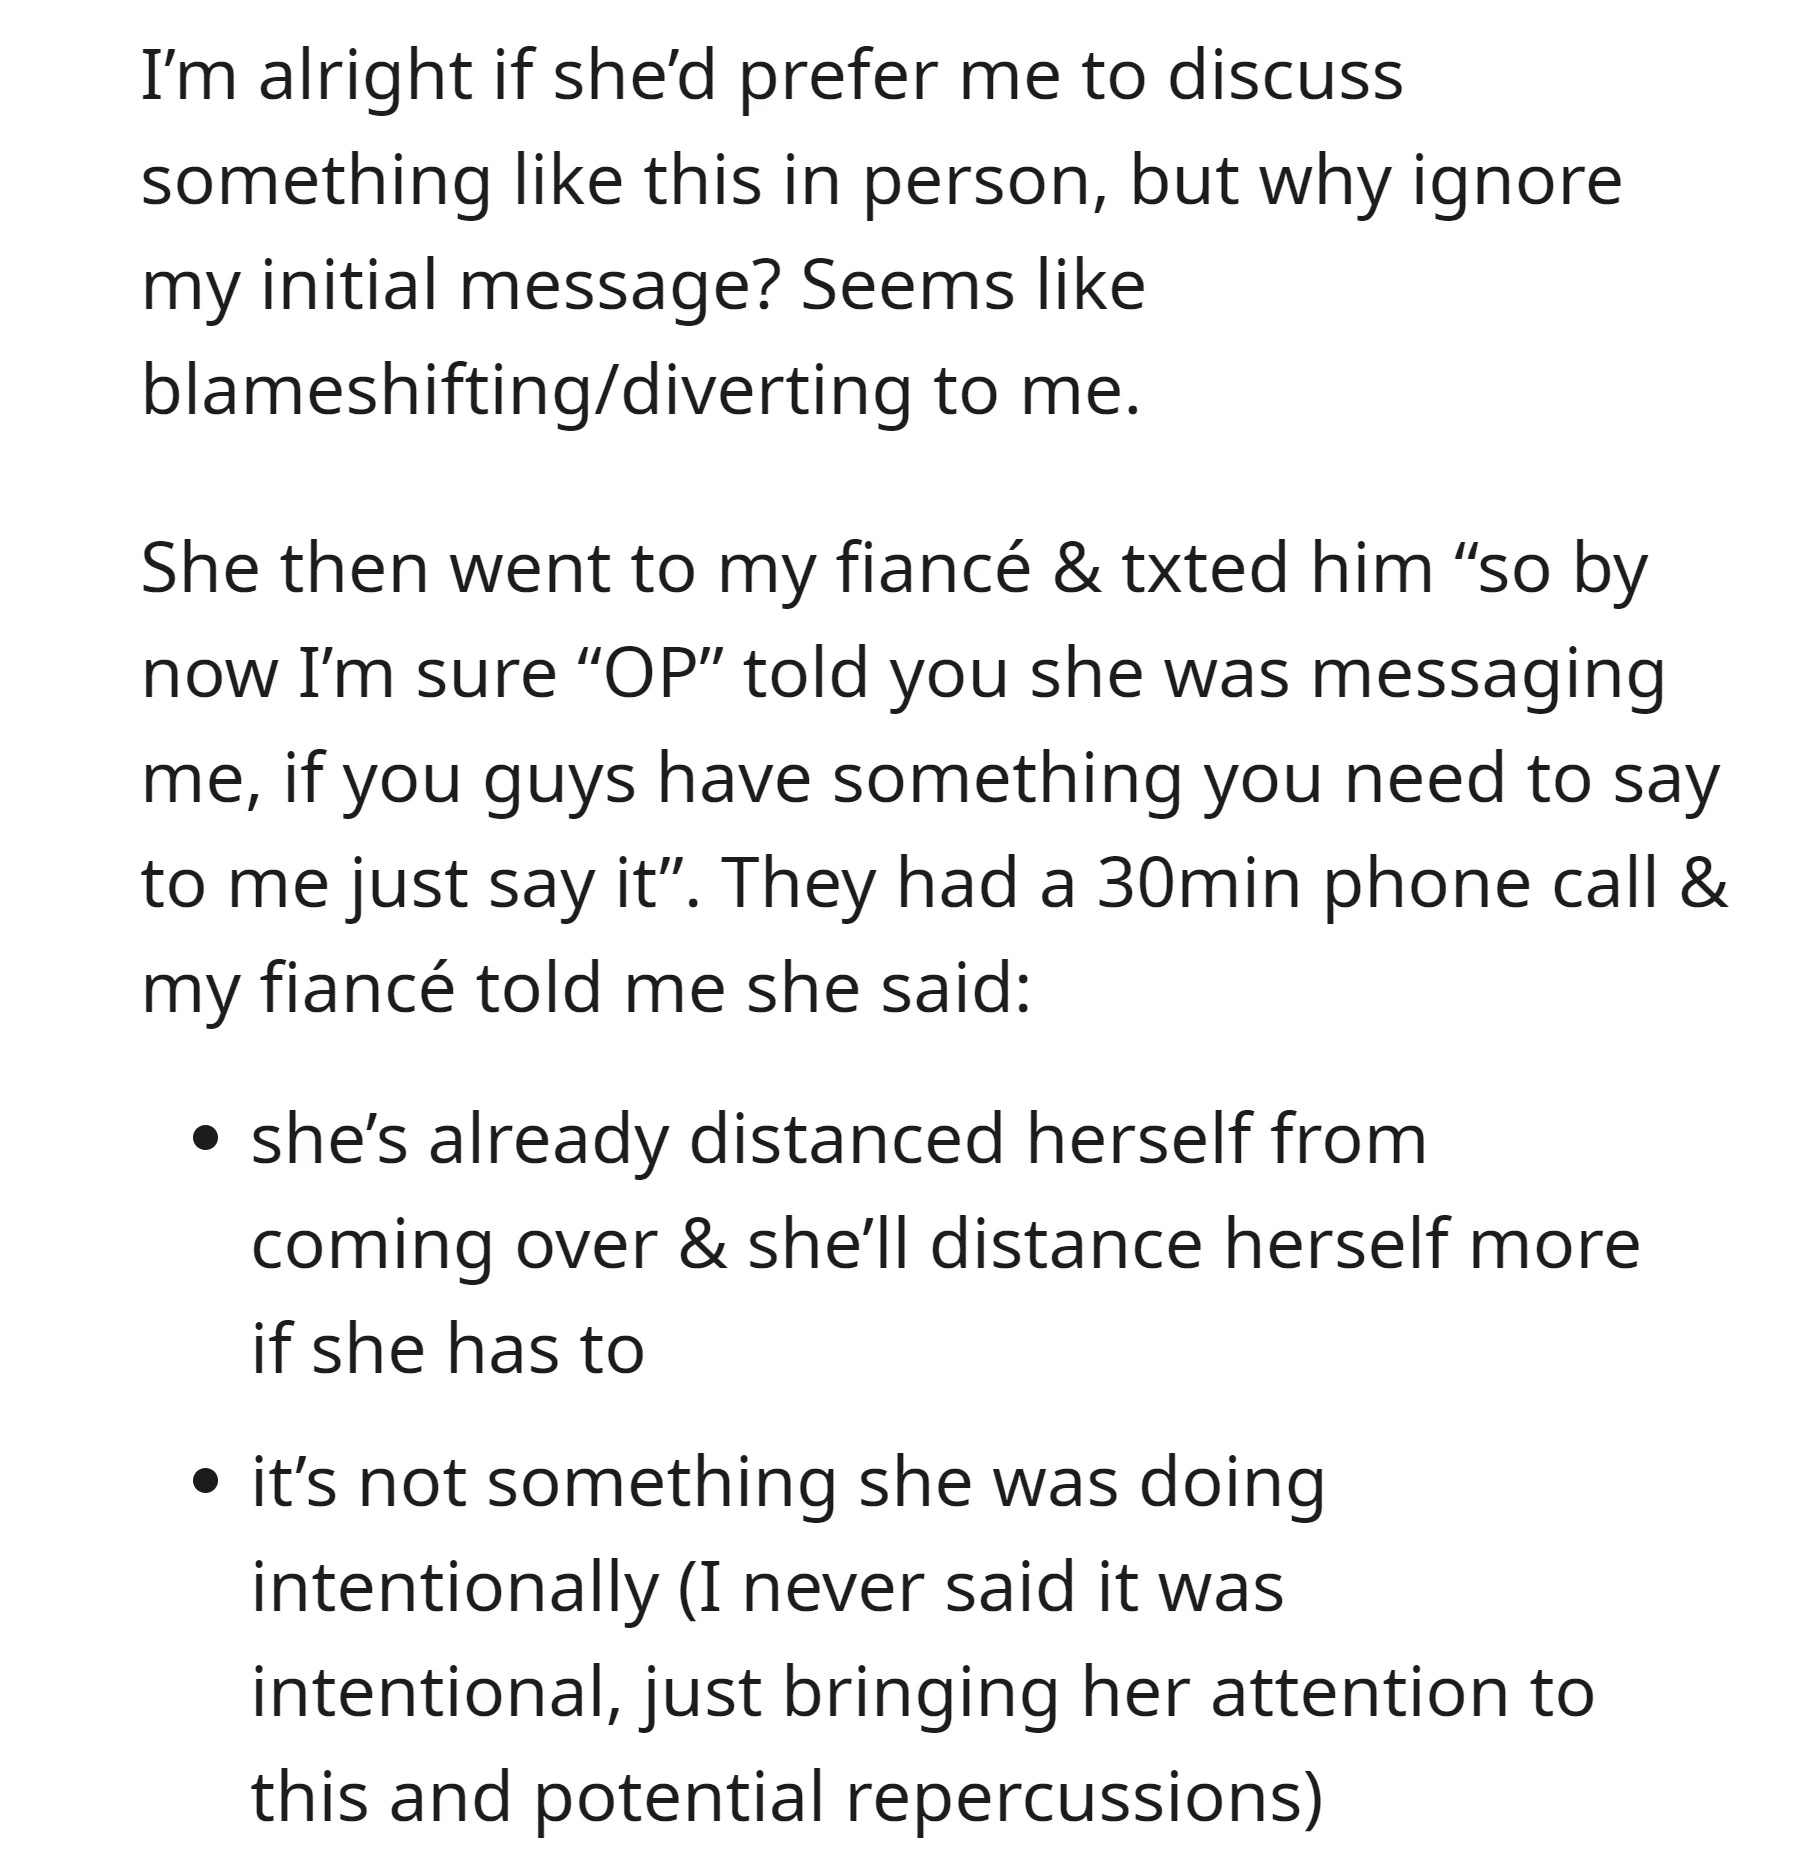 FMIL expressed to the fiancé that she was unaware of any intentional harm